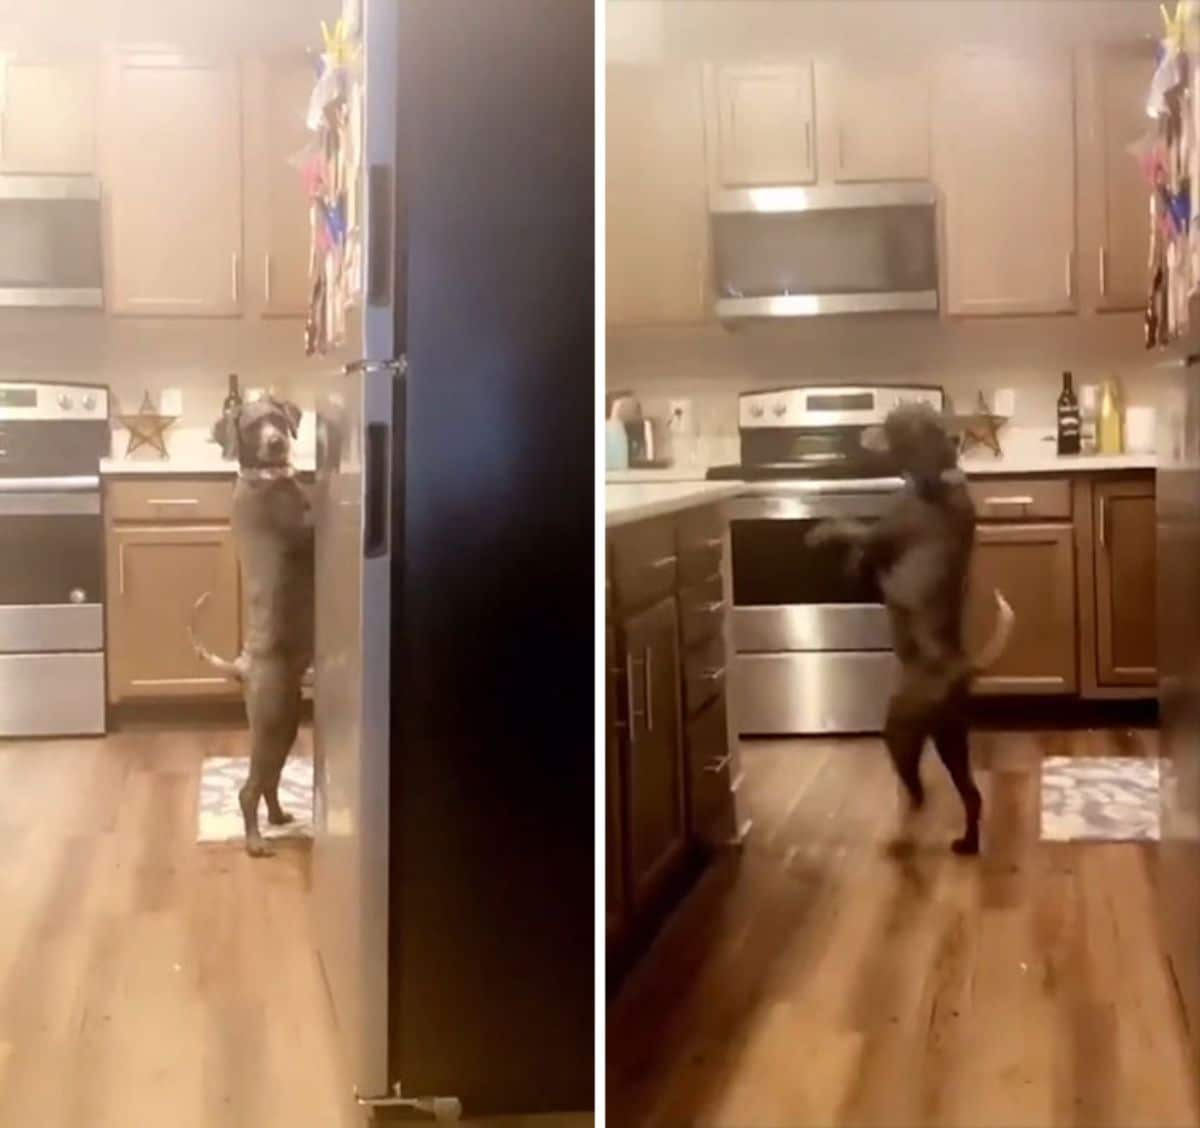 2 photos of a grey dog walking on its hind legs in a kitchen